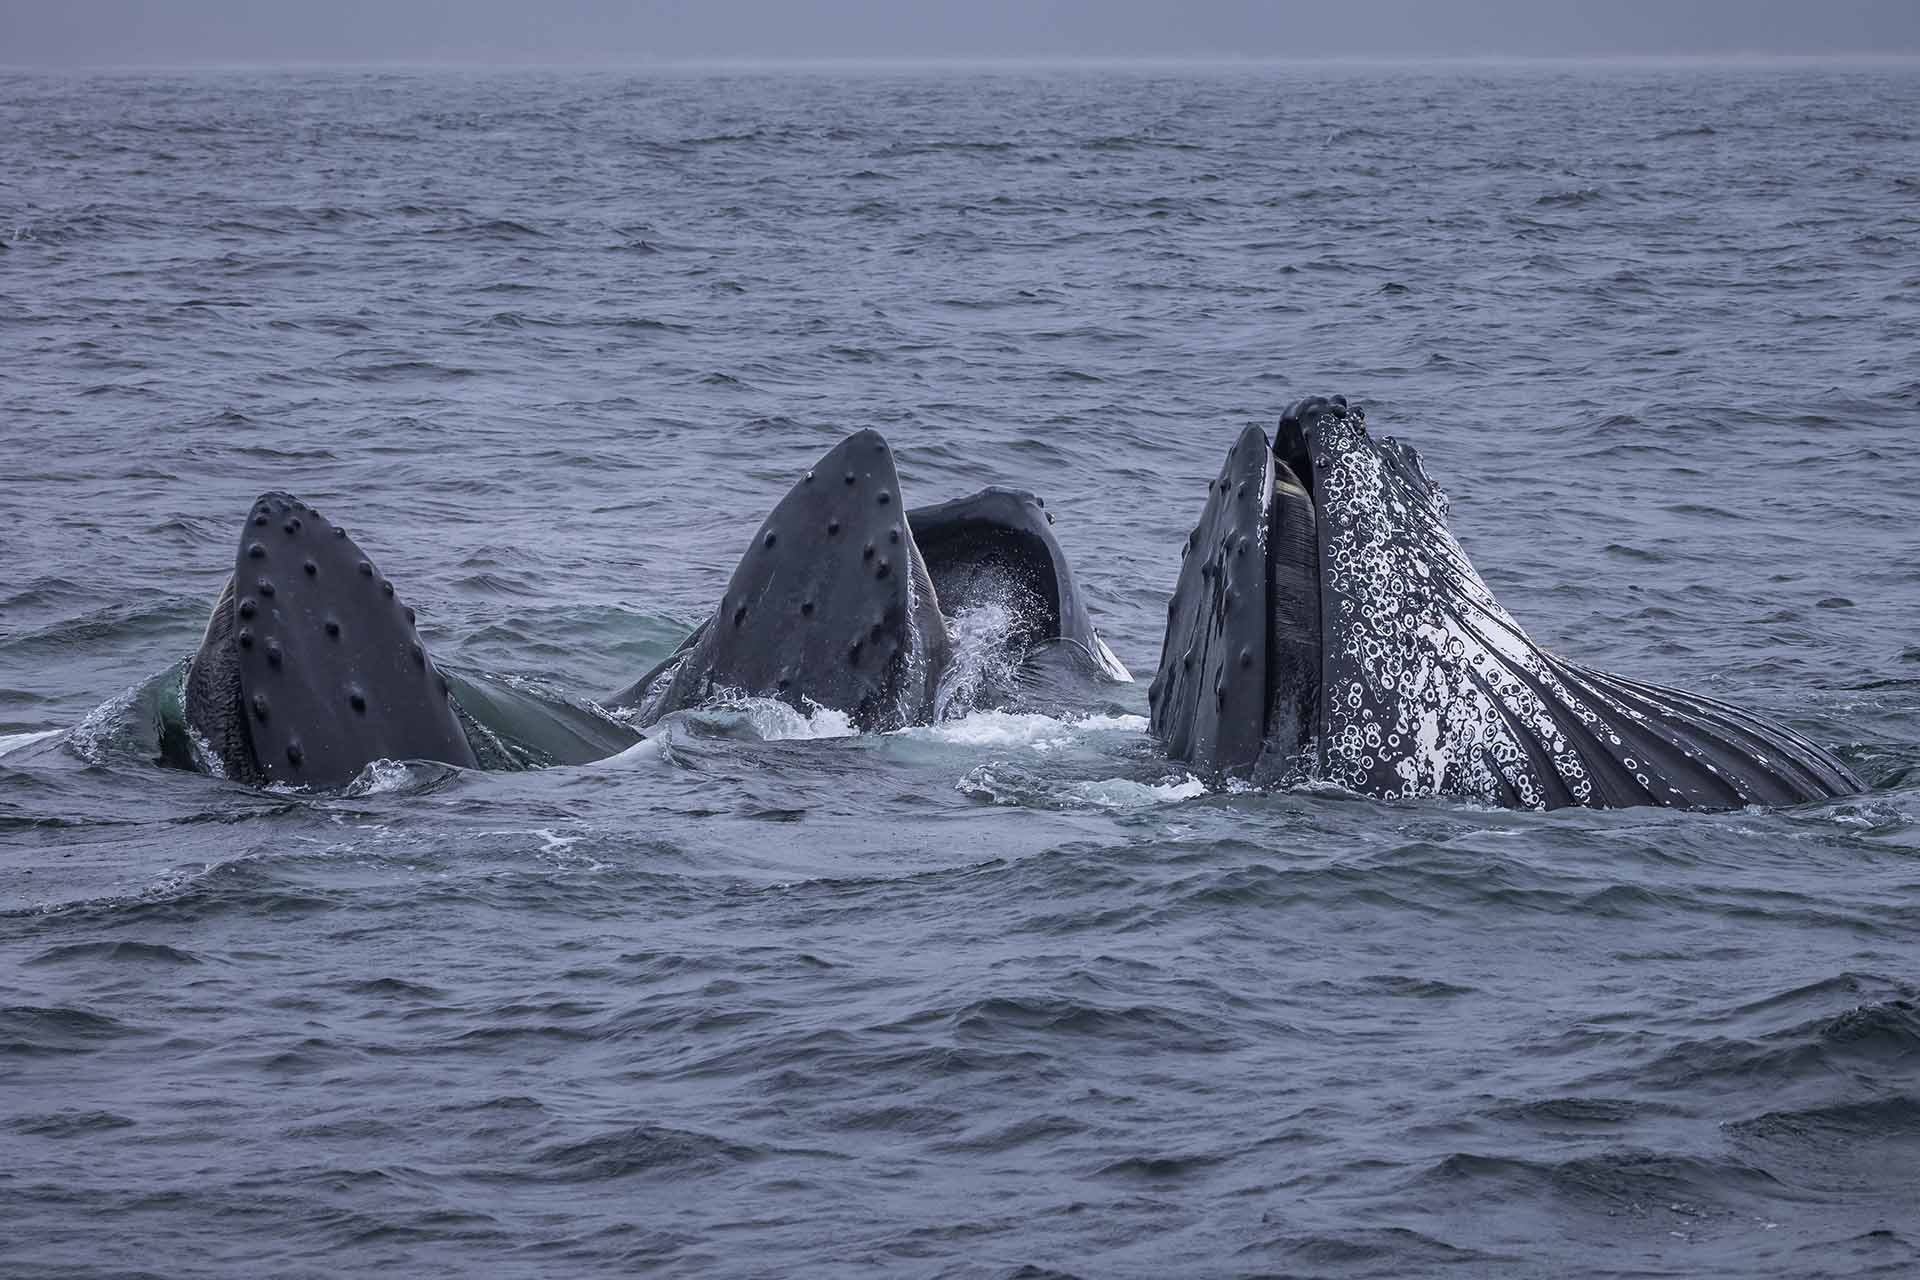 Whales, Humpback whales, whale watching, behaviour, moves, NSW, migration, south coast, feeding, bubble net feeding, bubblenet, bubble-net